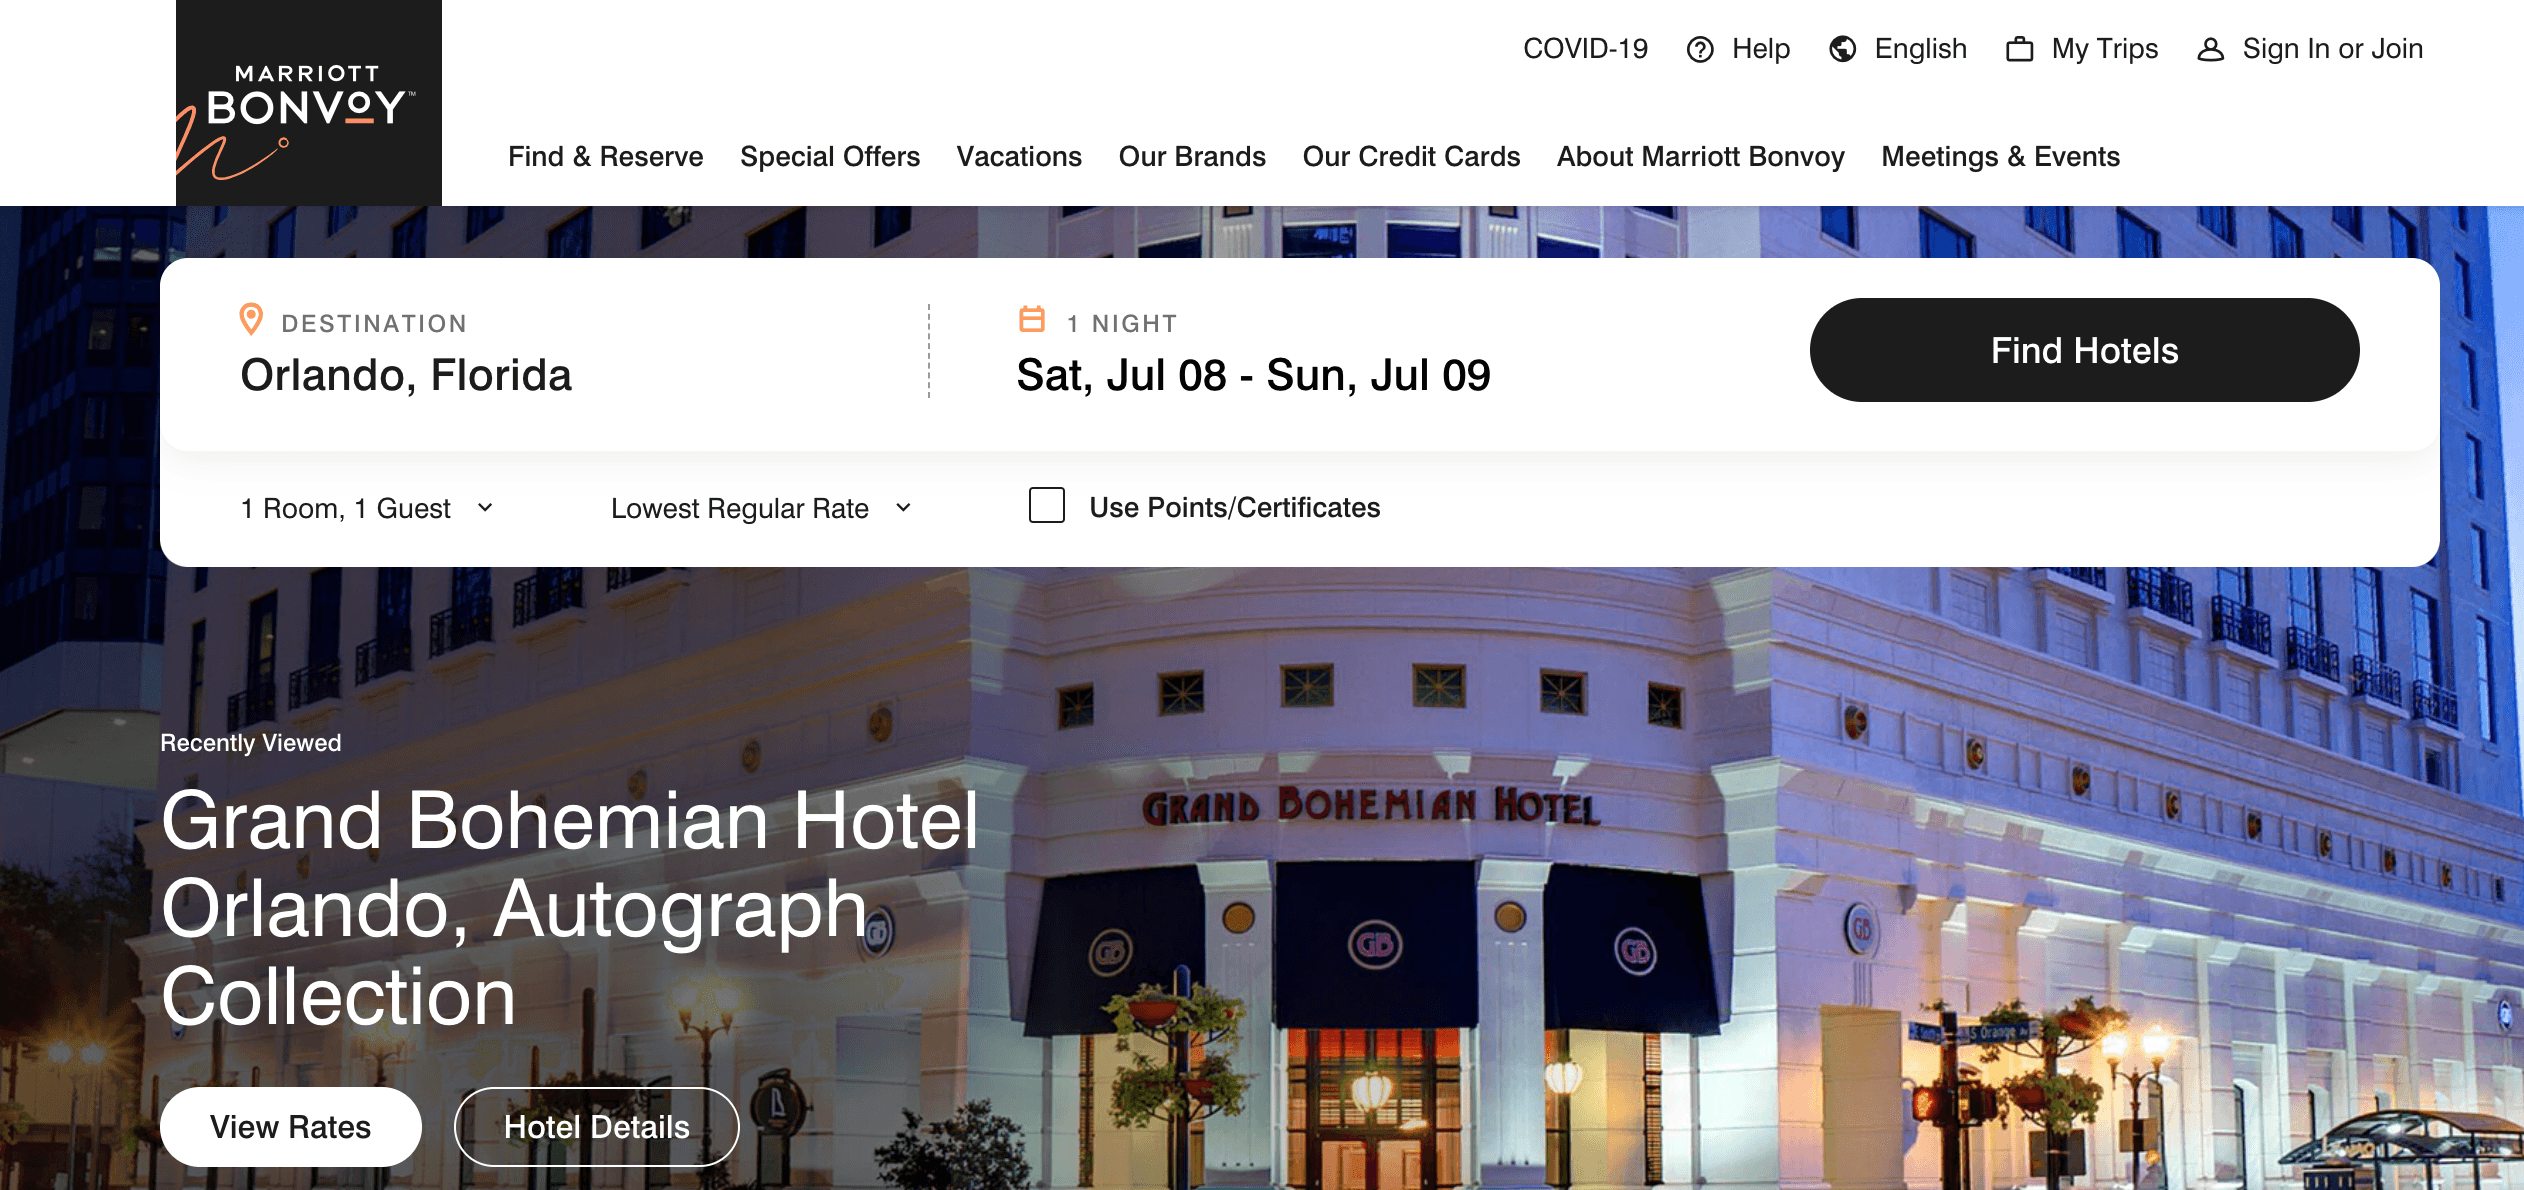 Hotel website with photos of the front of one of their buildings